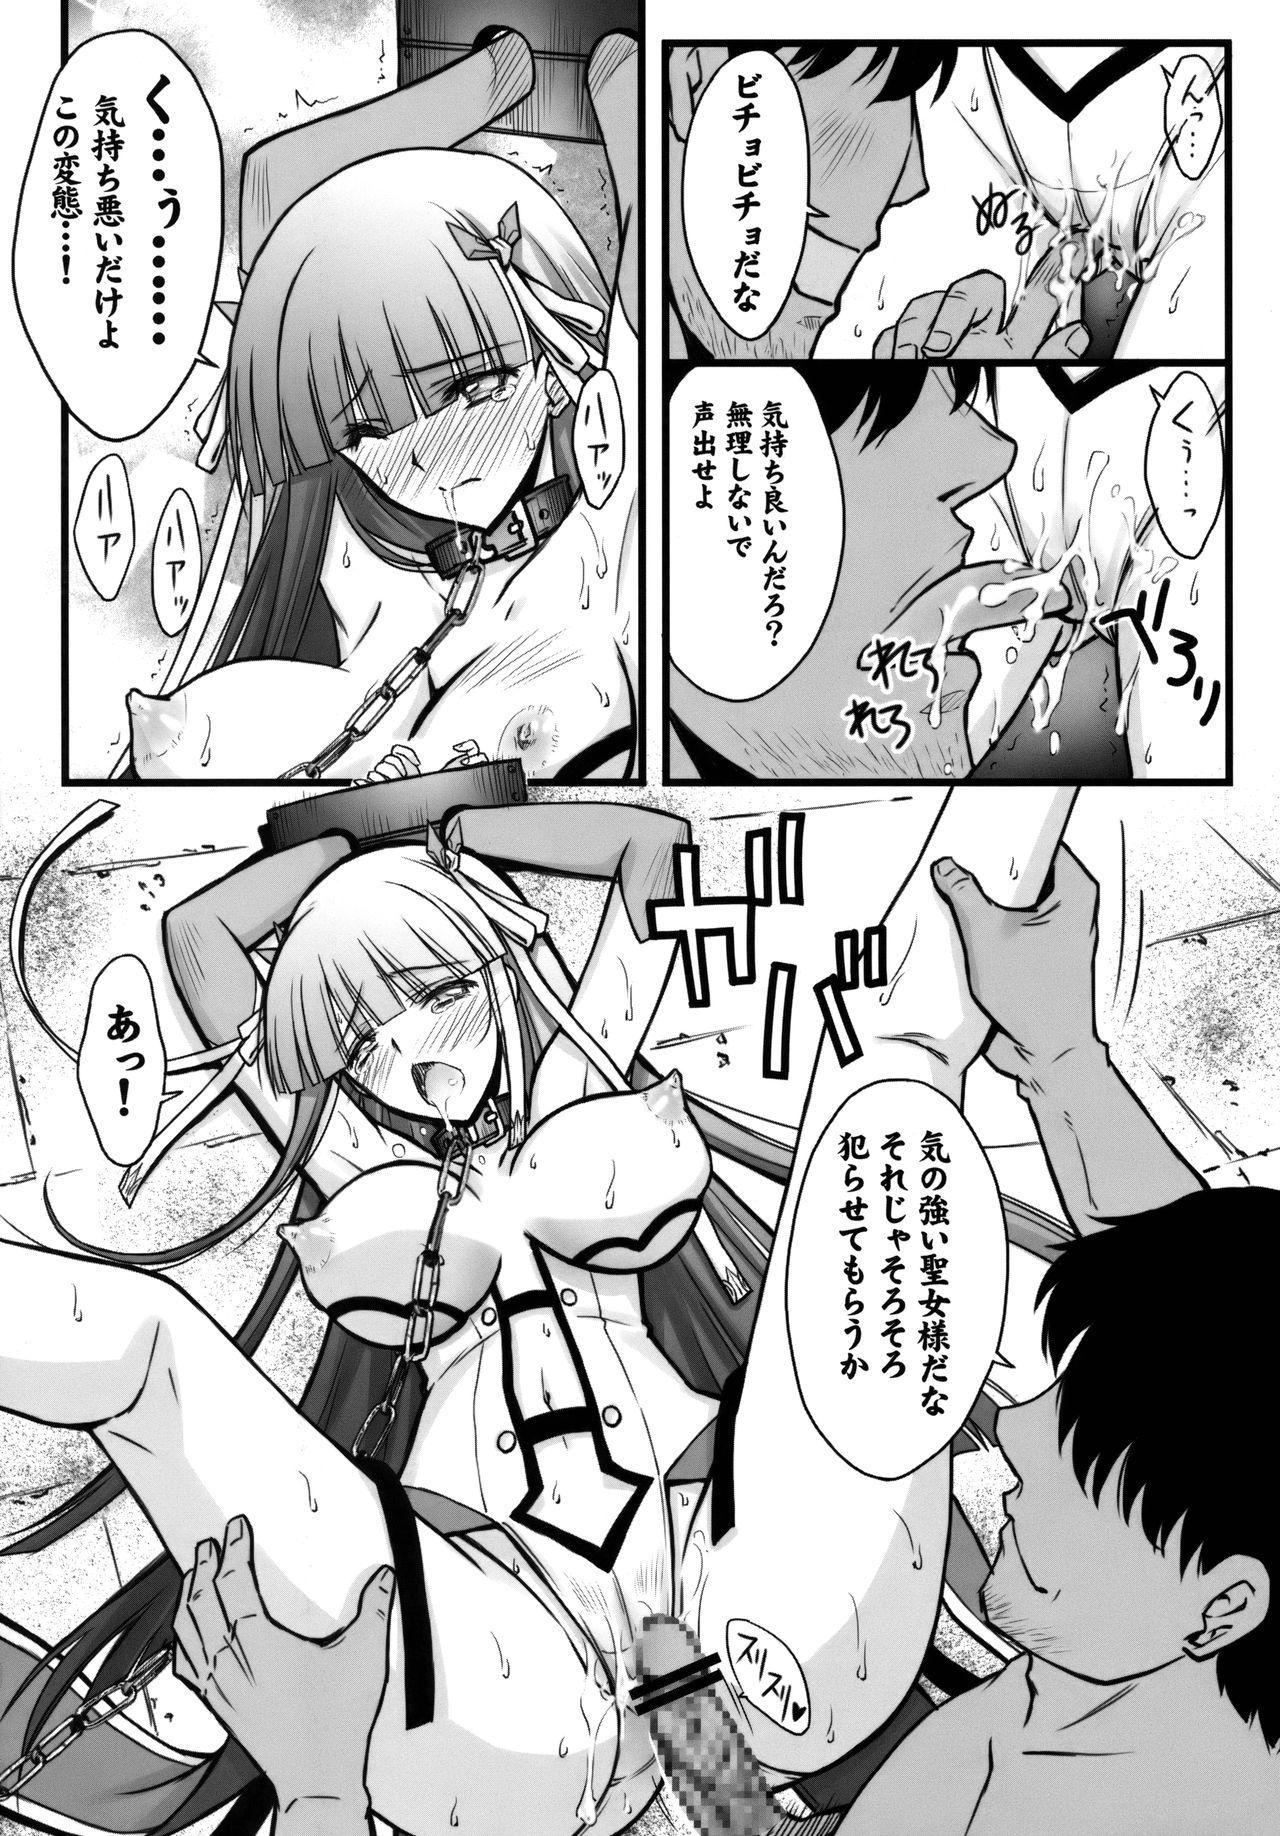 1080p Toraware Seijou - Fate grand order Pounded - Page 9